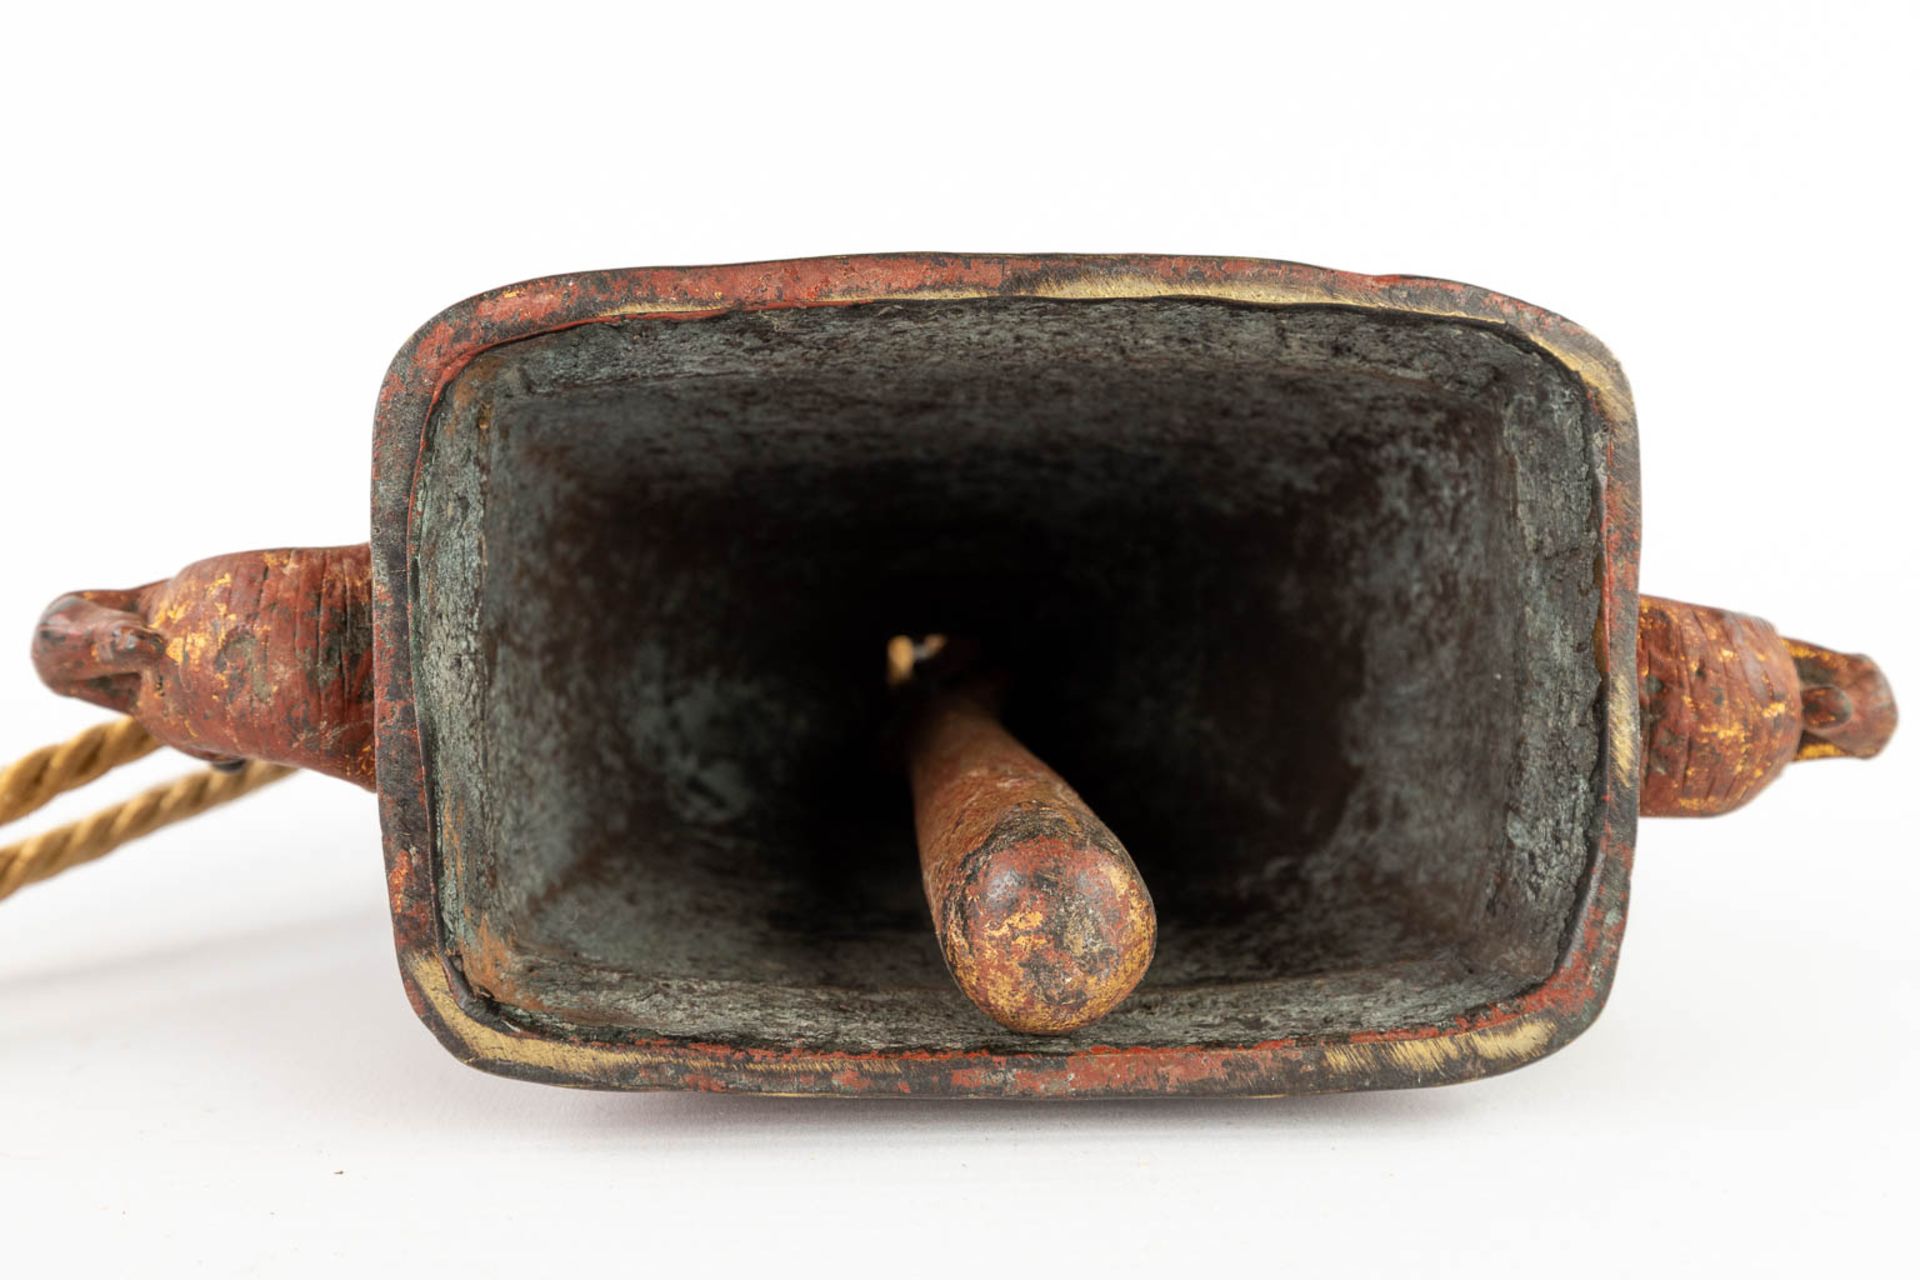 3 bells and a gong, Oriental. 19th/20th C. (L:13 x W:47 x H:55 cm) - Image 28 of 28